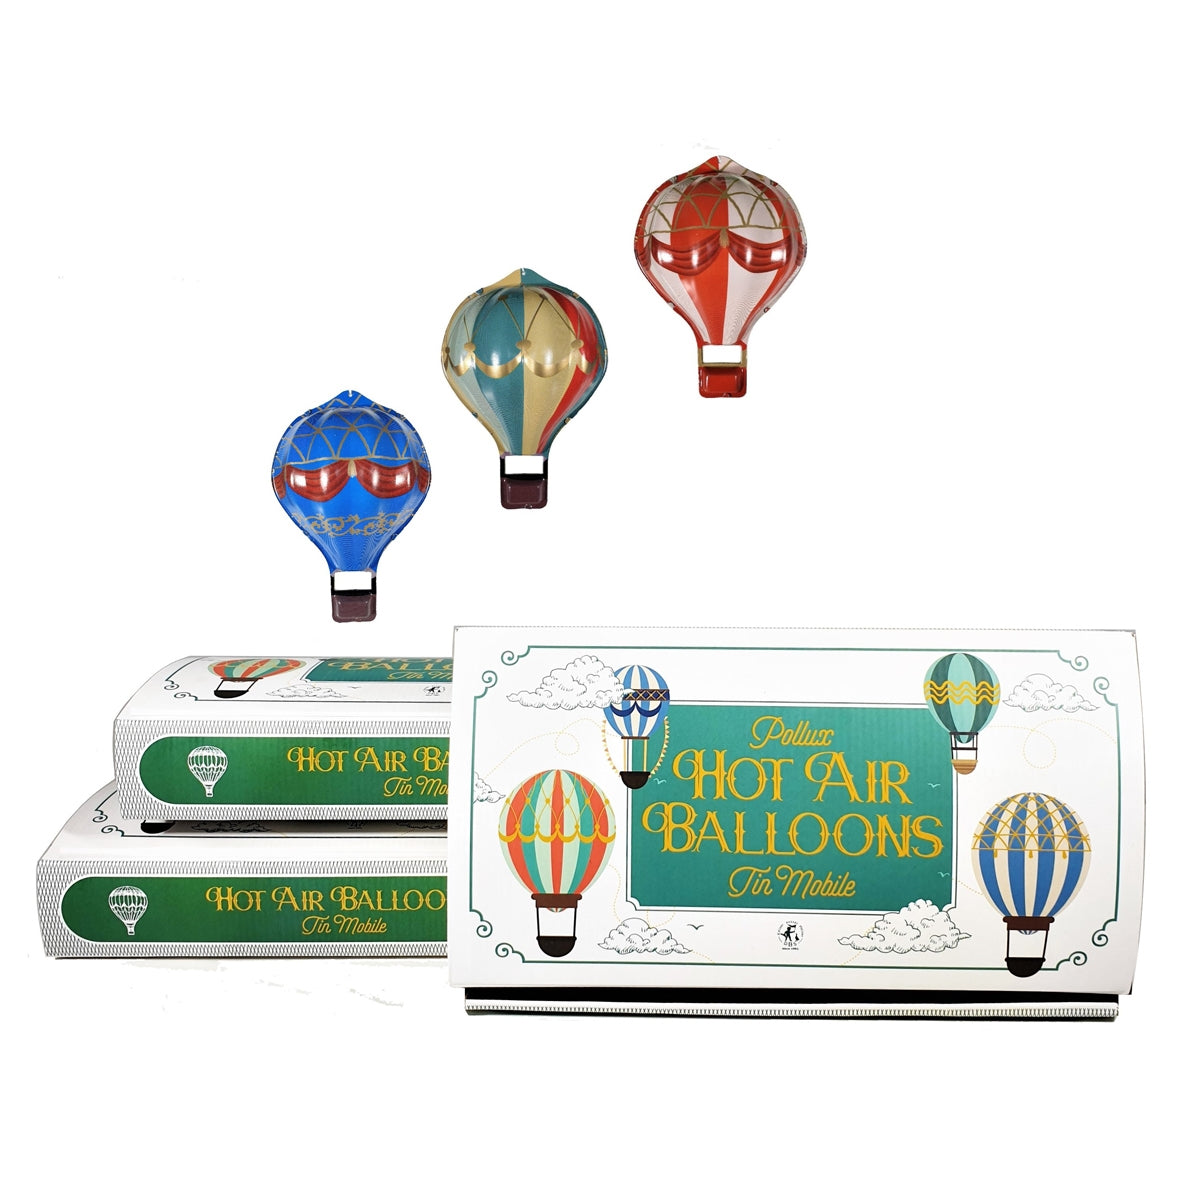 “Pollux” Mobile Hot Air Balloons